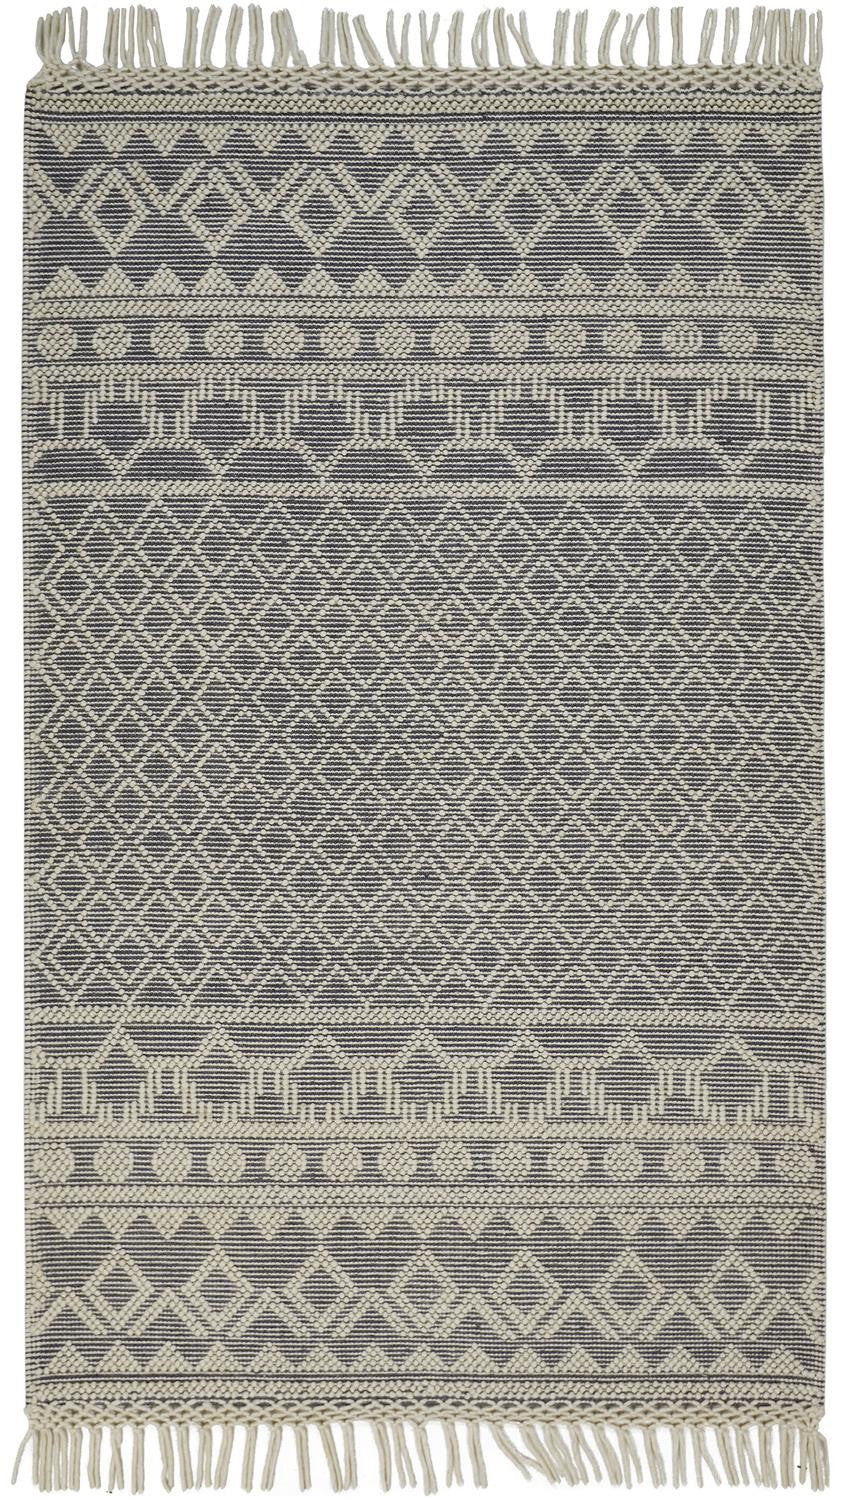 4' X 6' Gray And Ivory Wool Geometric Hand Woven Area Rug With Fringe